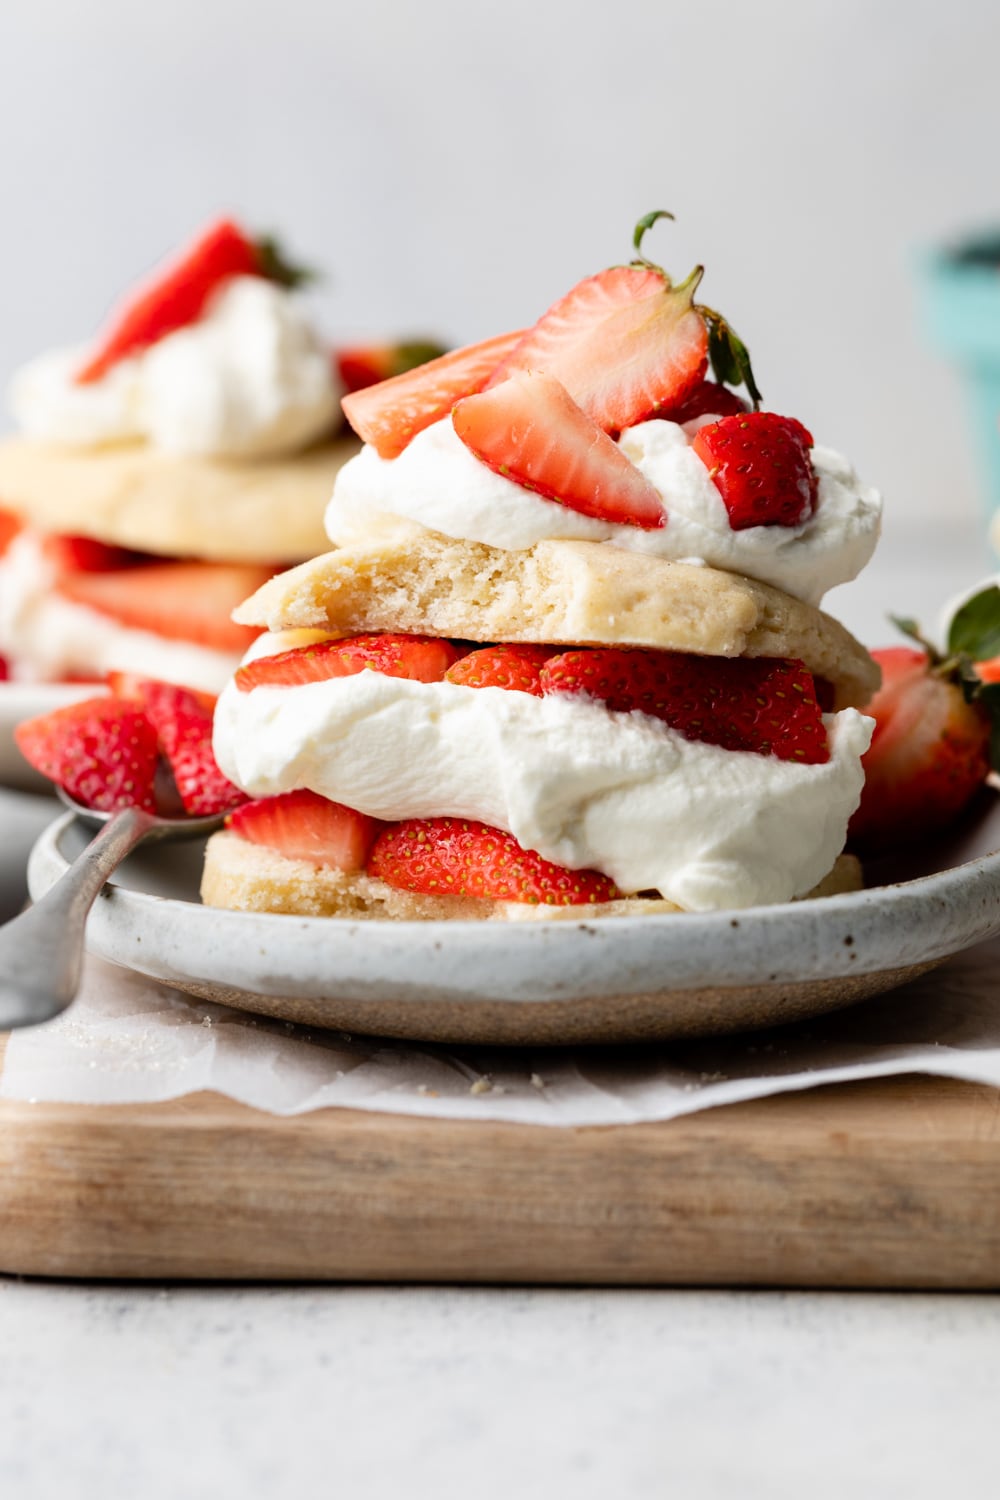 Gluten free strawberry shortcake assembled with whipped cream and strawberries on top.